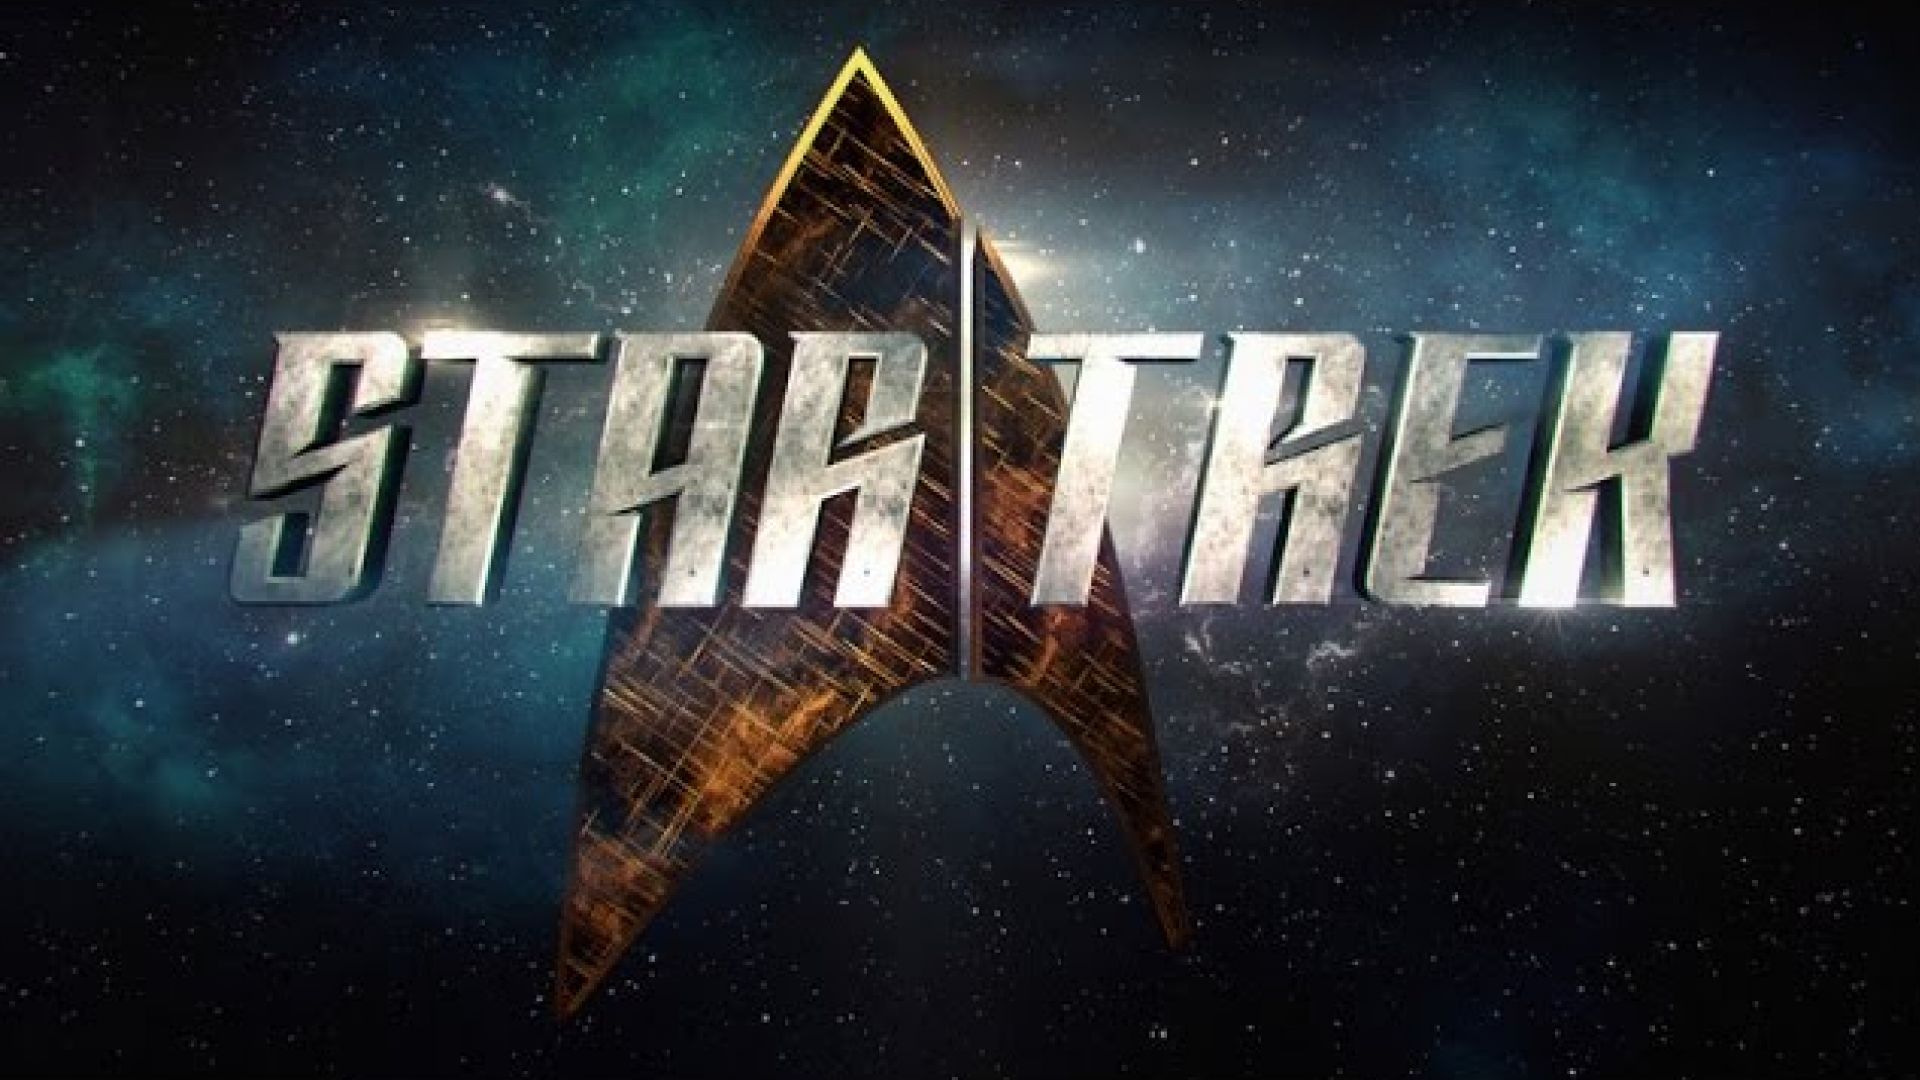 Star Trek Television Logo And First Look Teaser Revealed